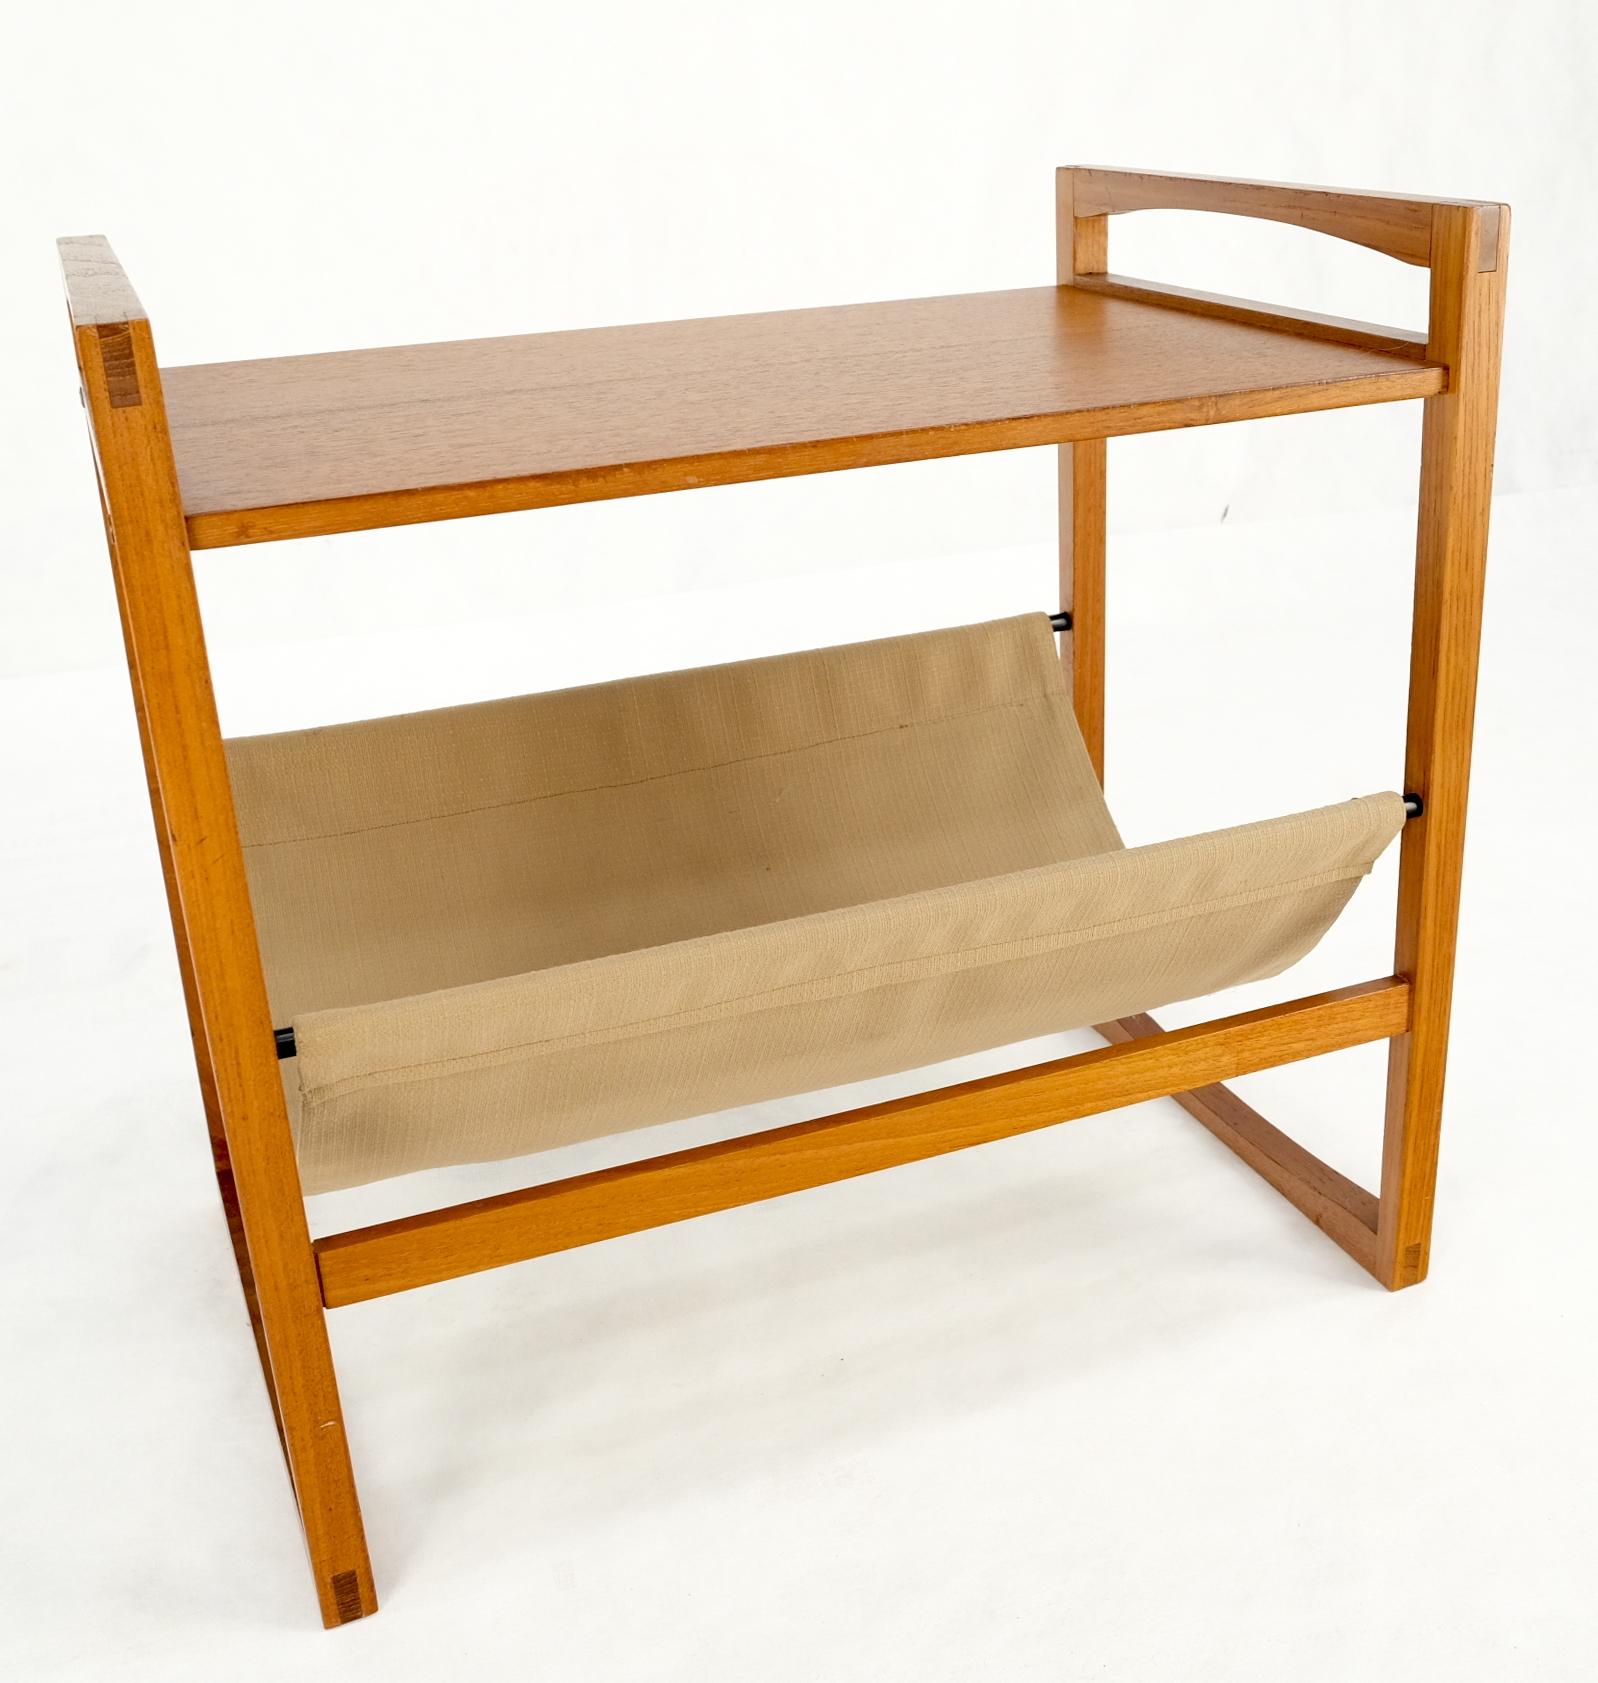 Teak And Suede Sling Shelf Mid-Century Modern End Table Stand Magazine Rack For Sale 4